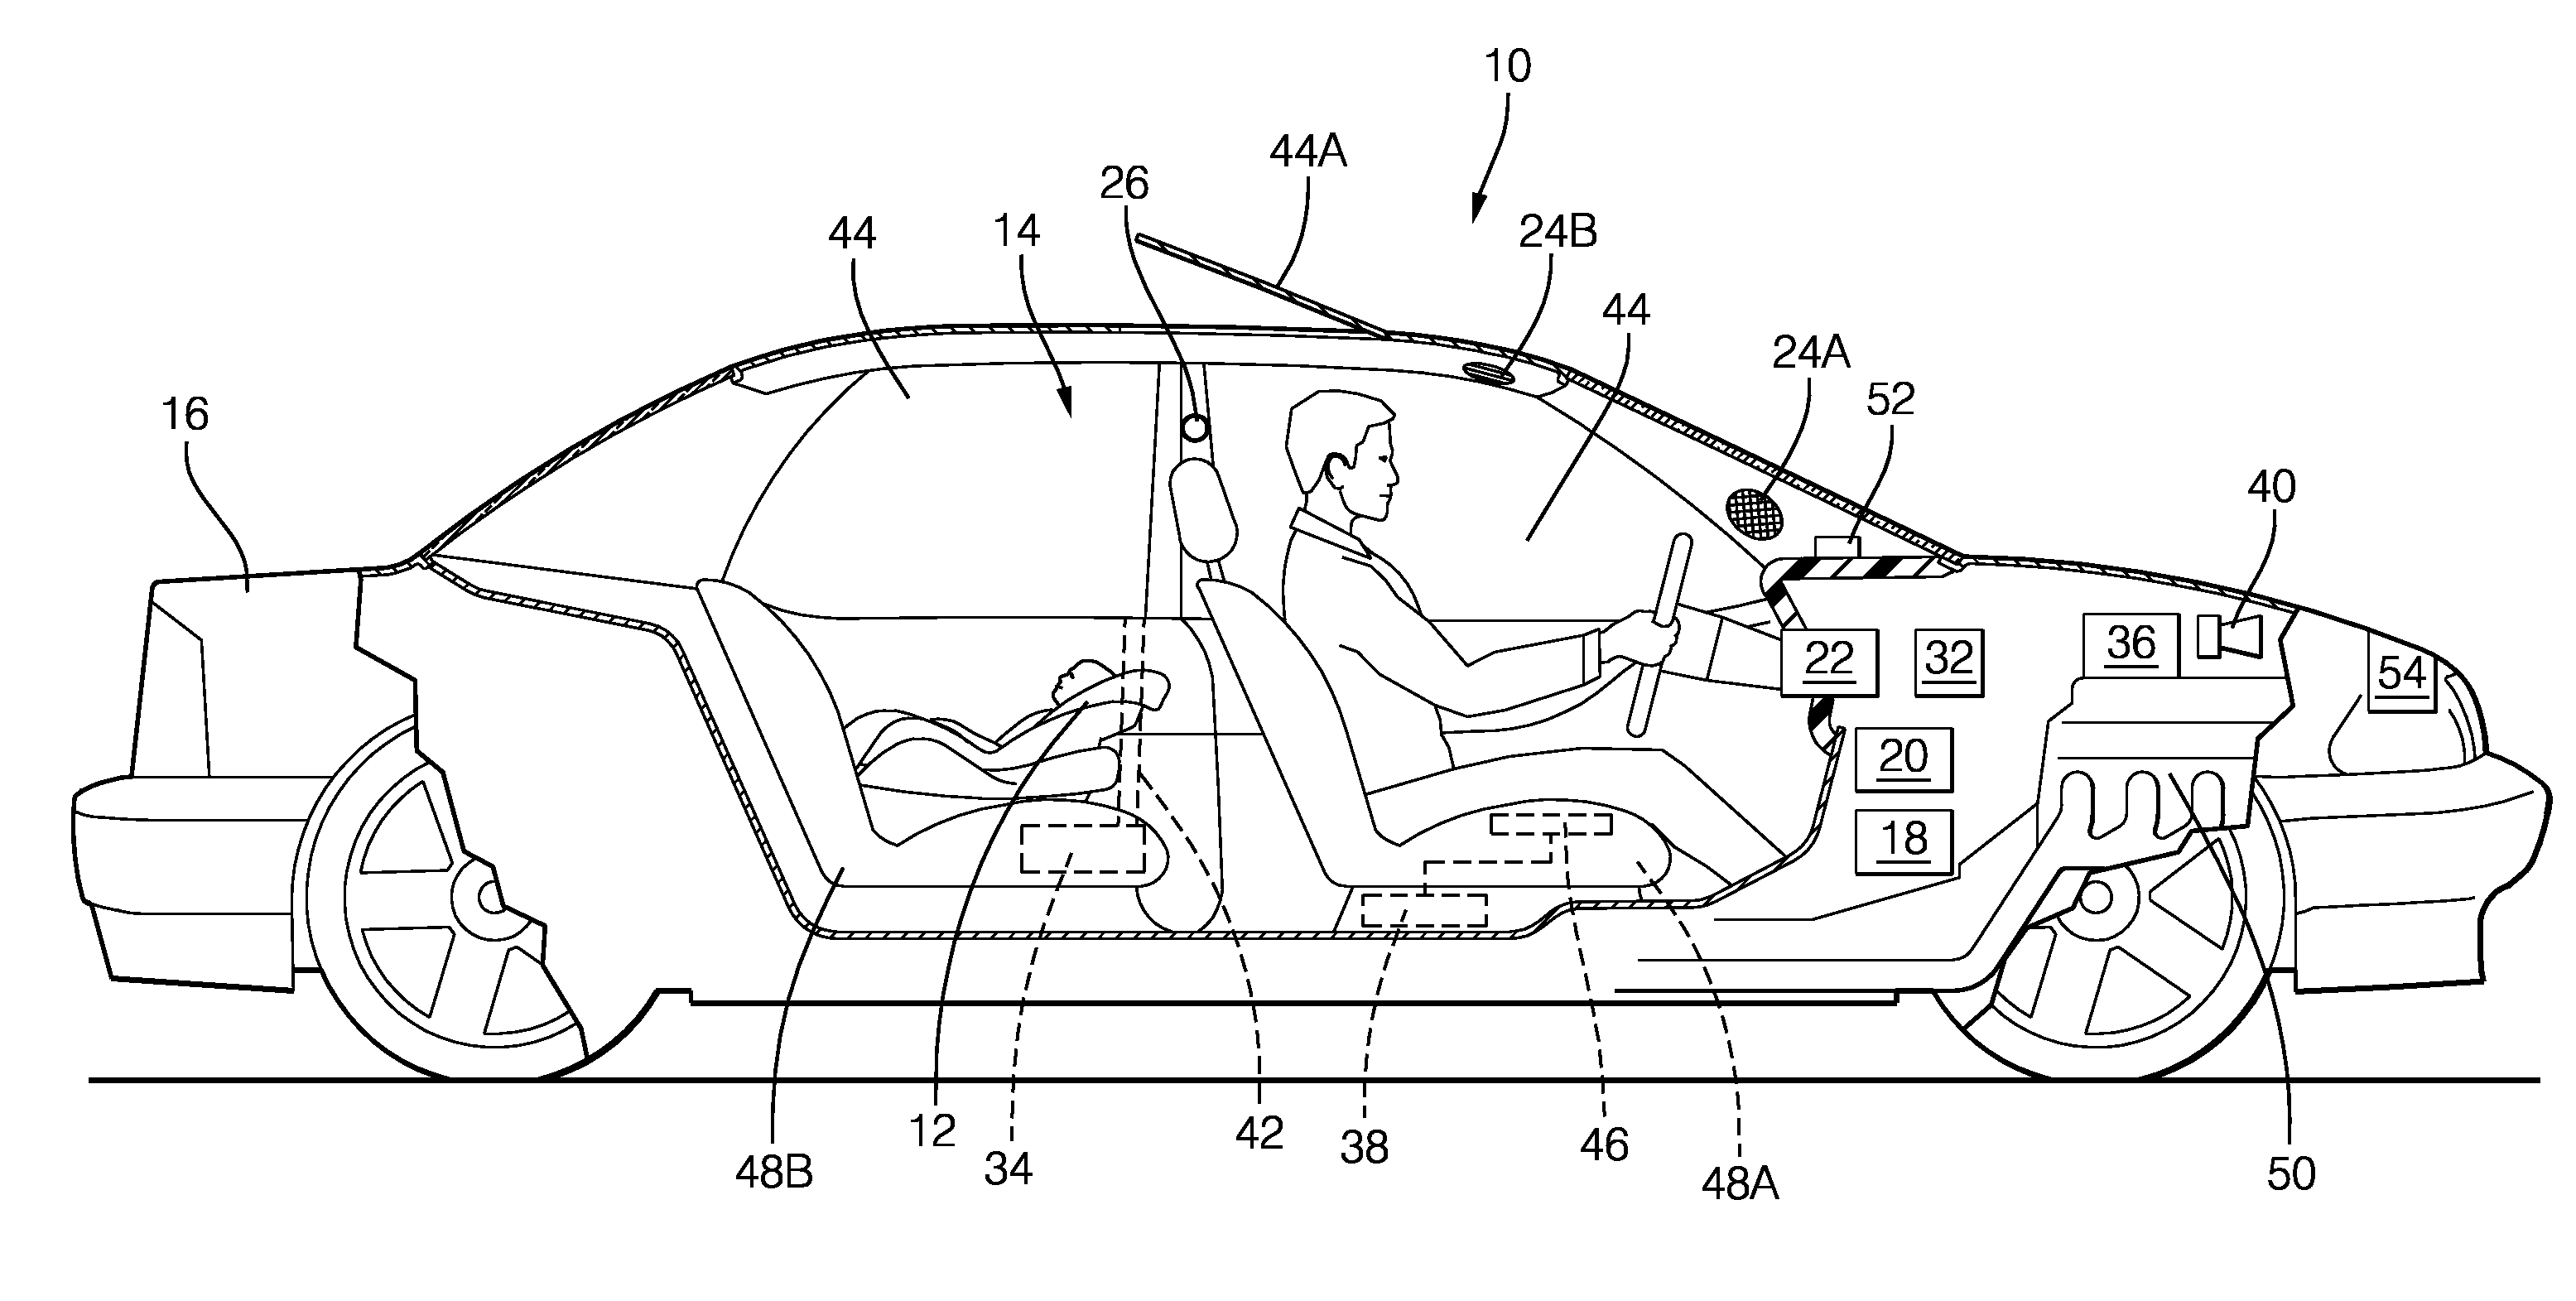 System and method to detect an unattended occupant in a vehicle and take safety countermeasures